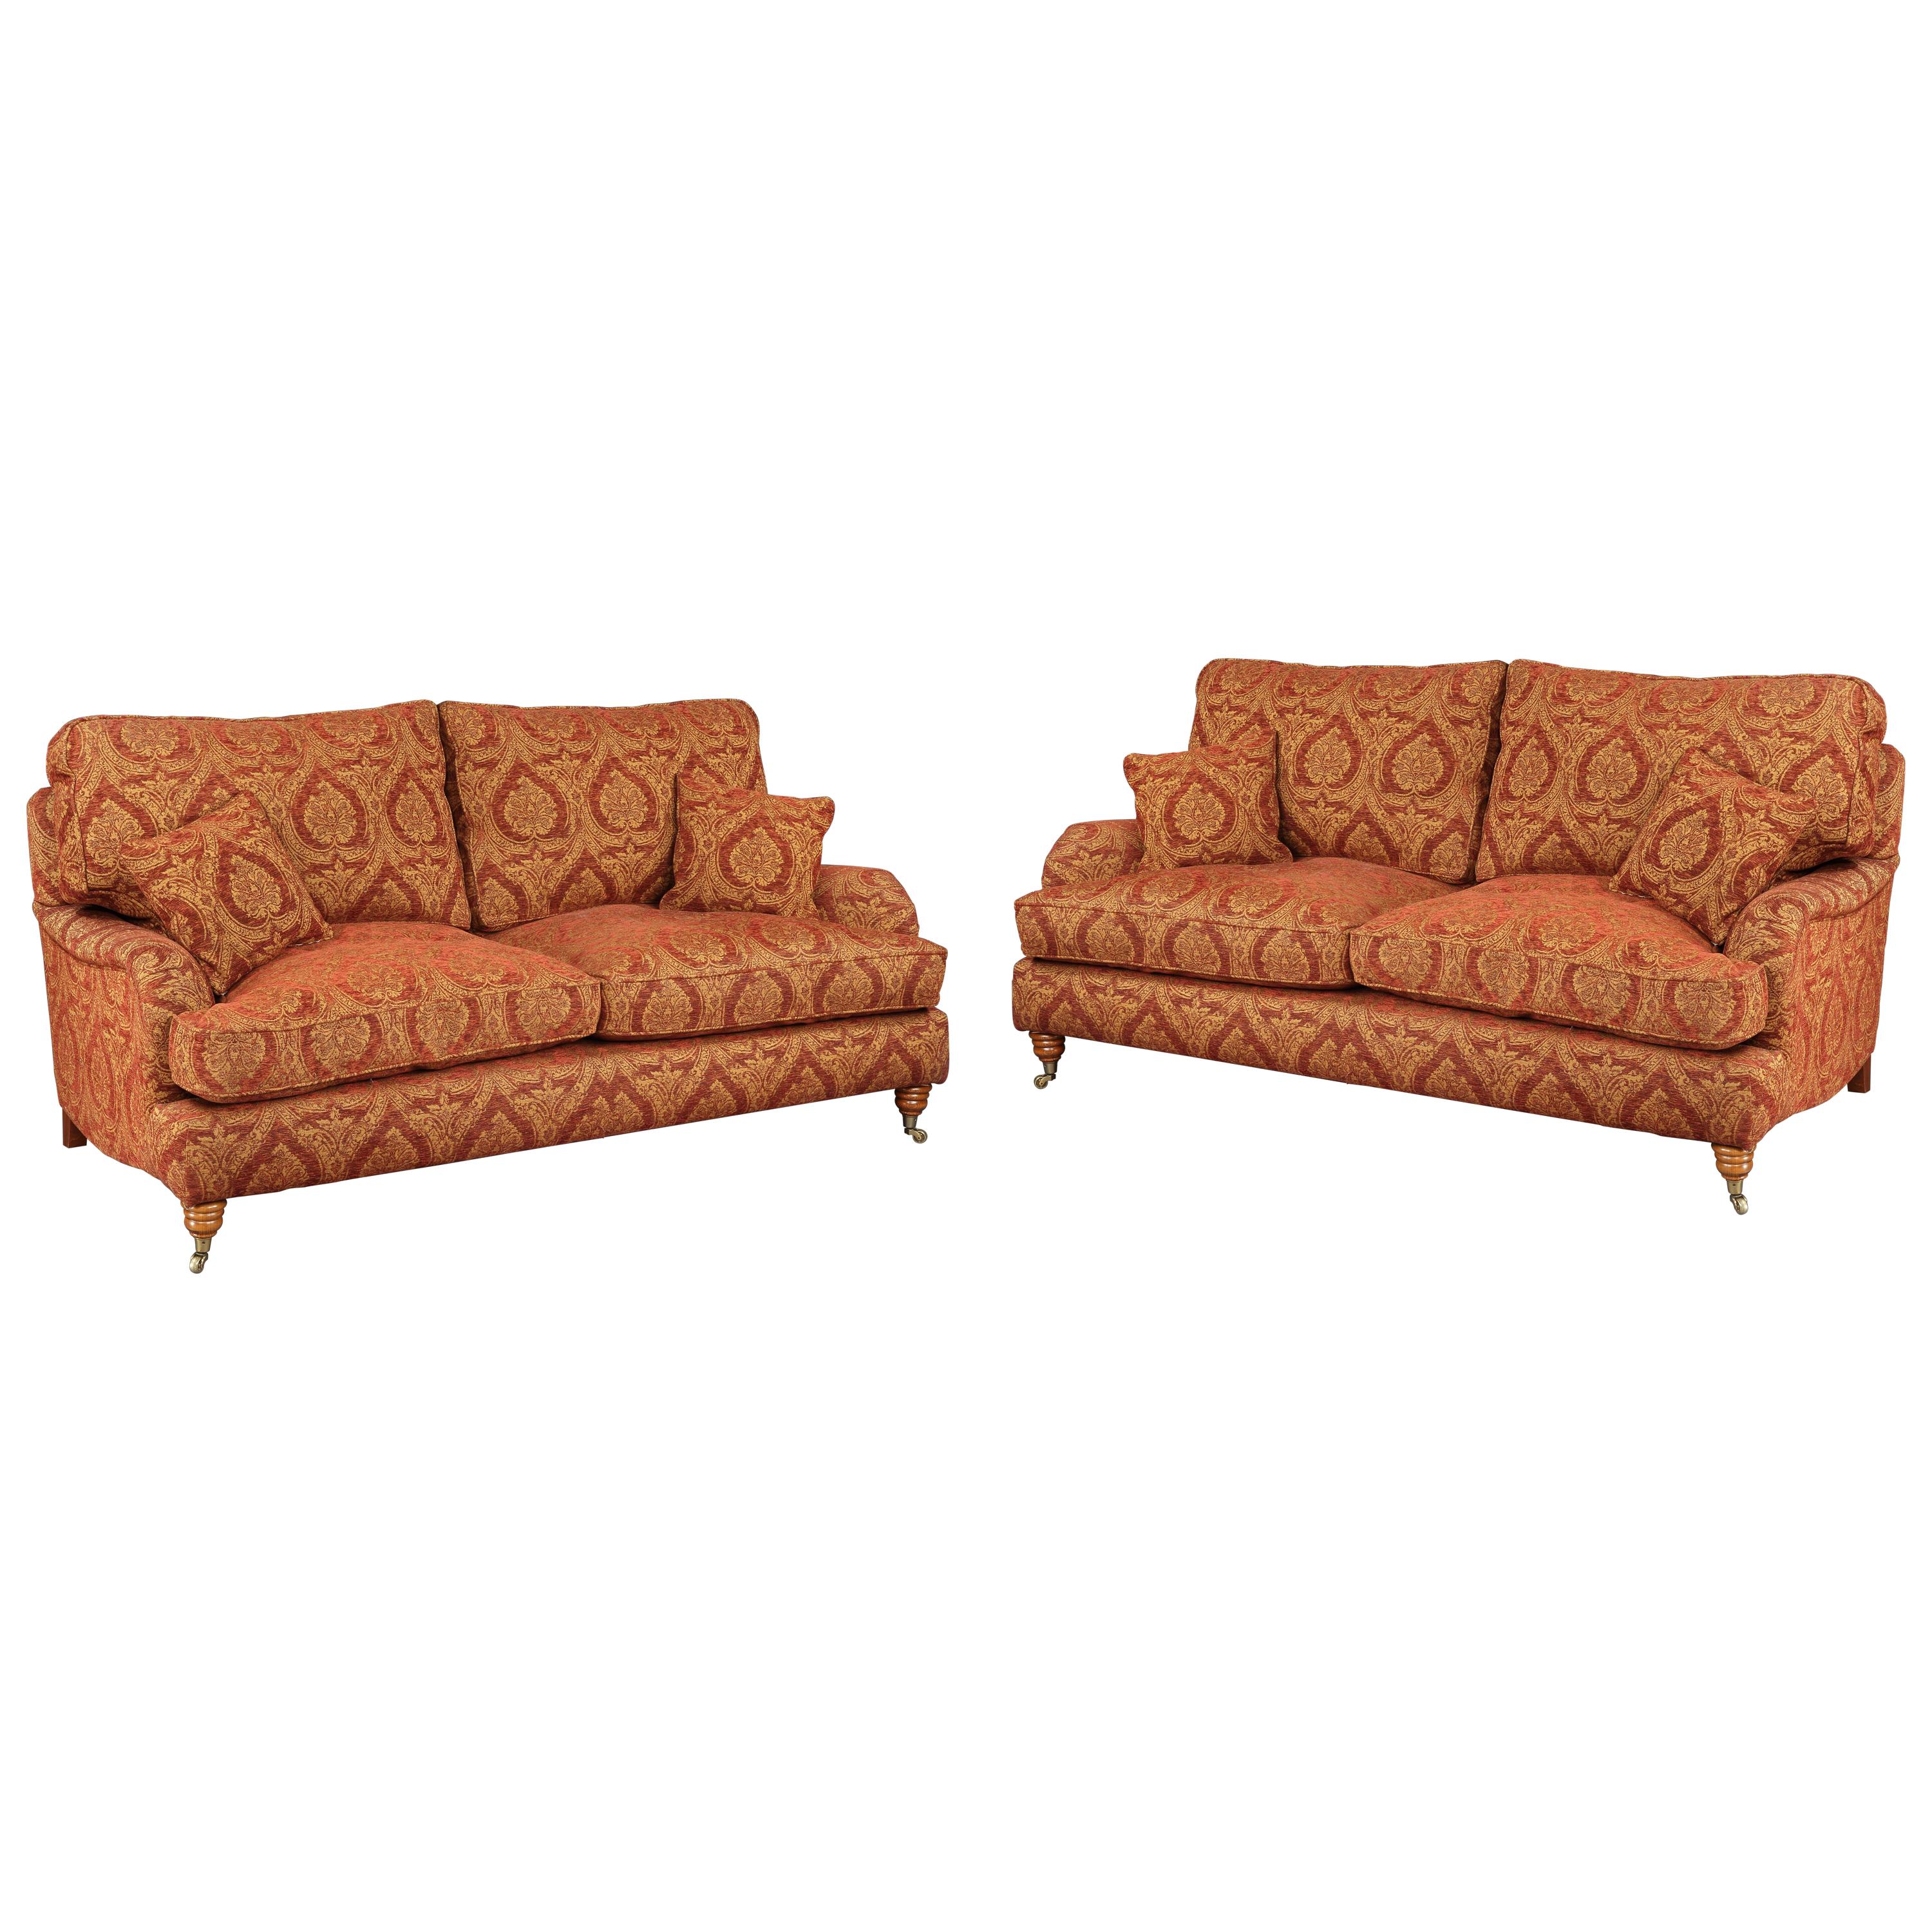 Settee Sofa Pair of 3-Seat Howard Parker & Farr Red-Wine Gold Mulberry Paisley